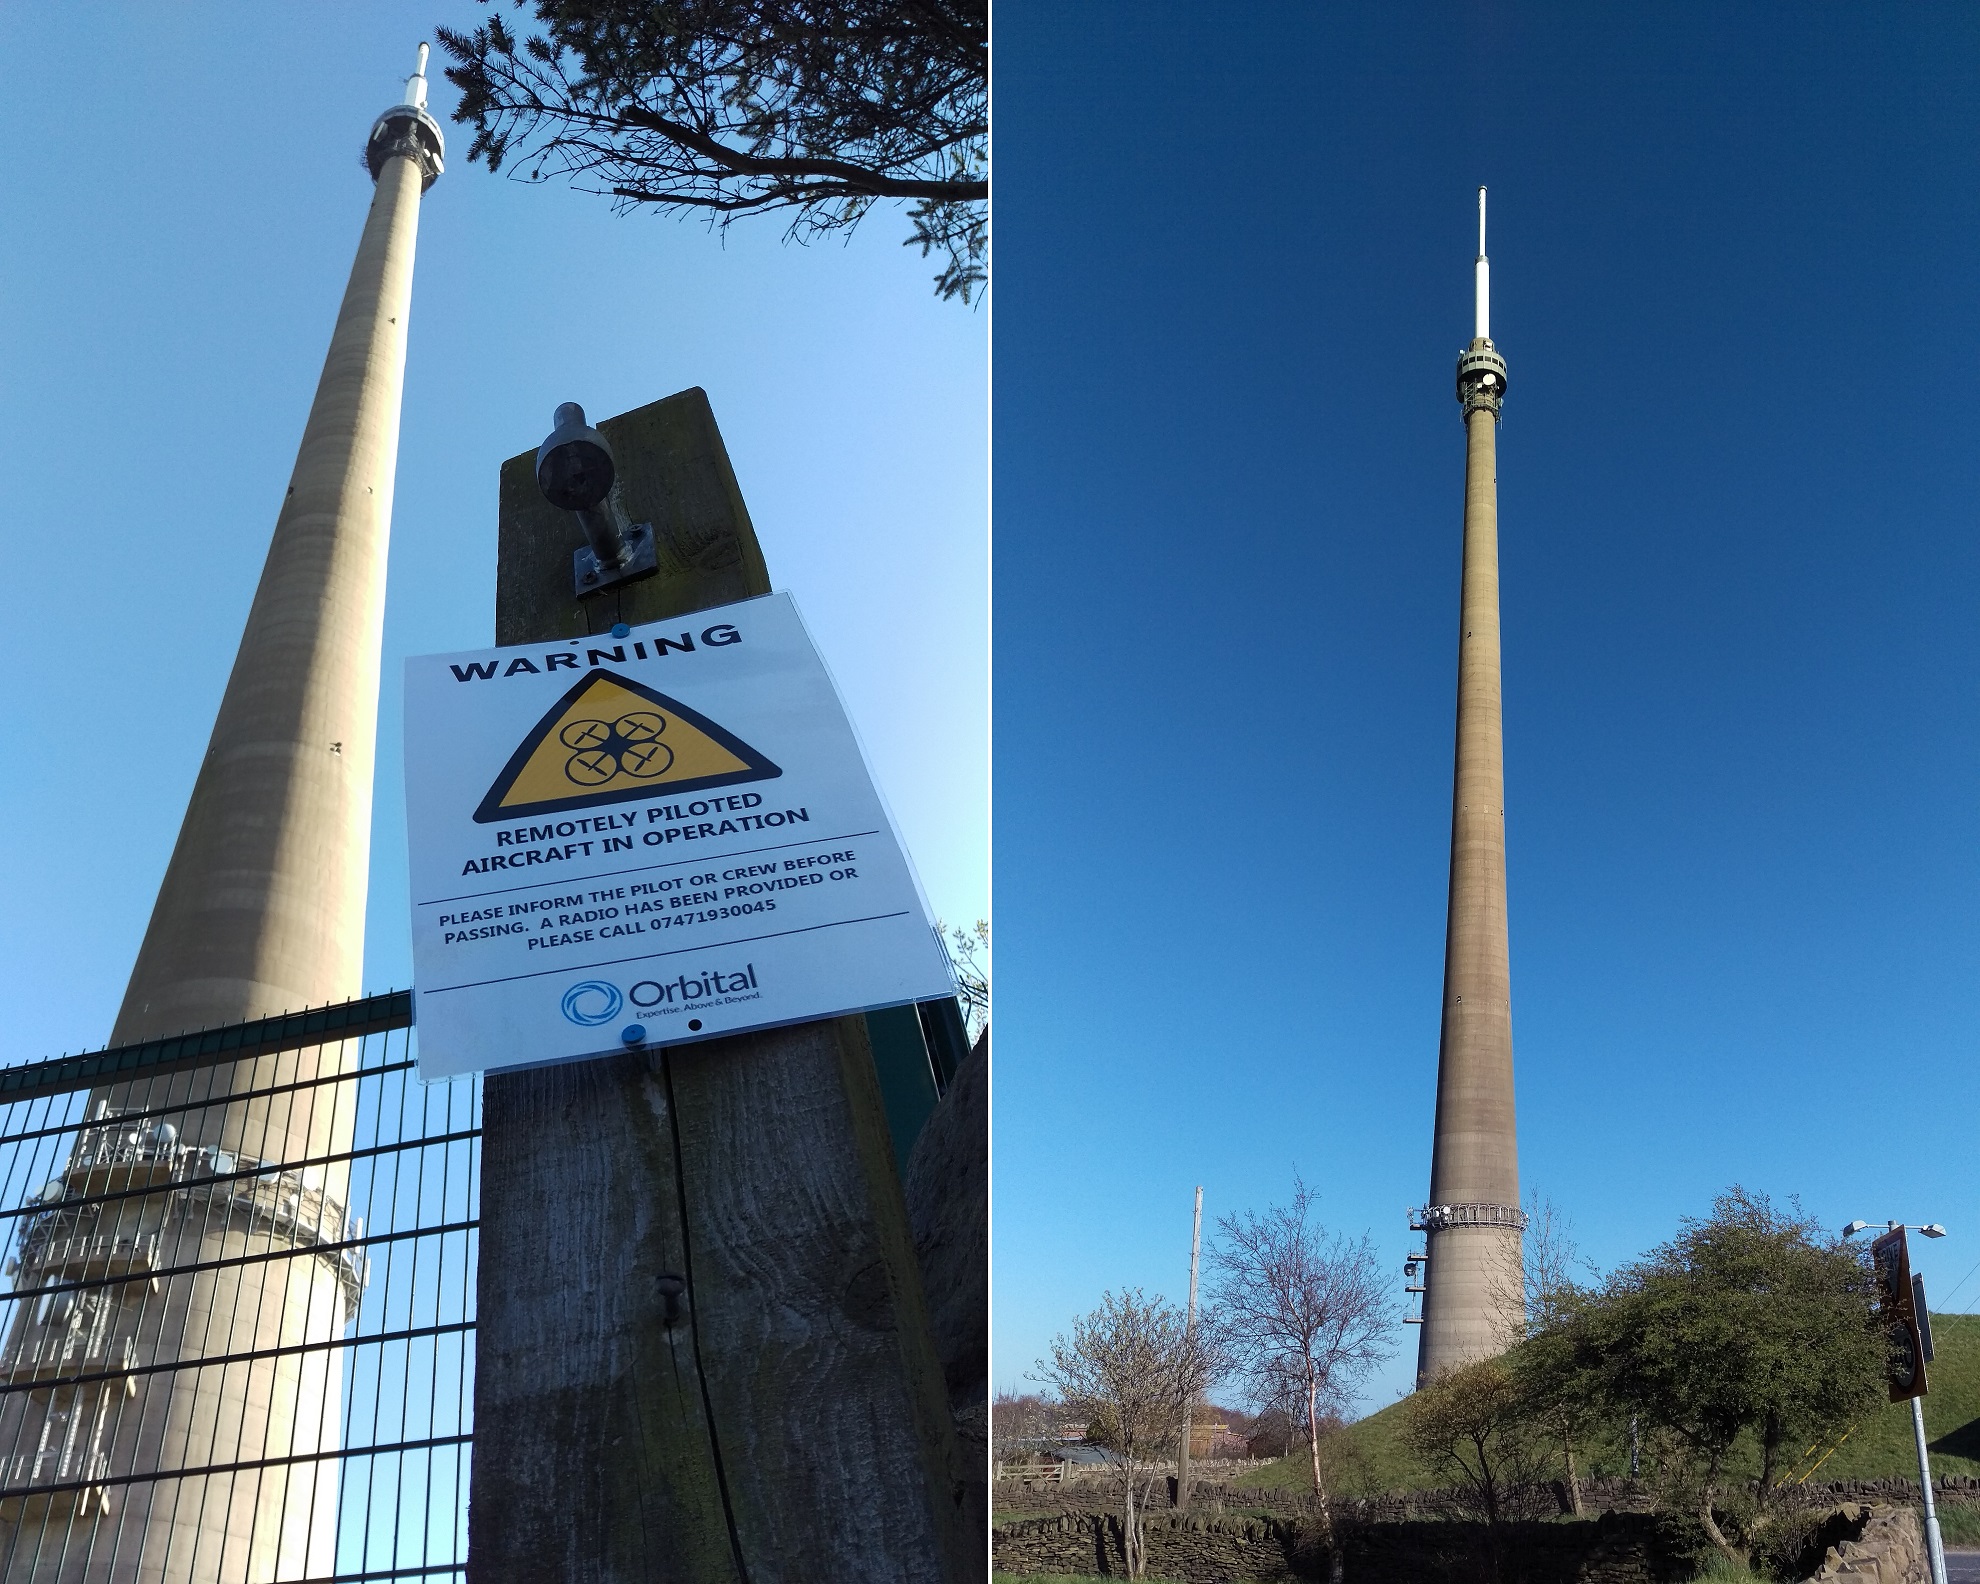 Two images of the highest tower in the UK